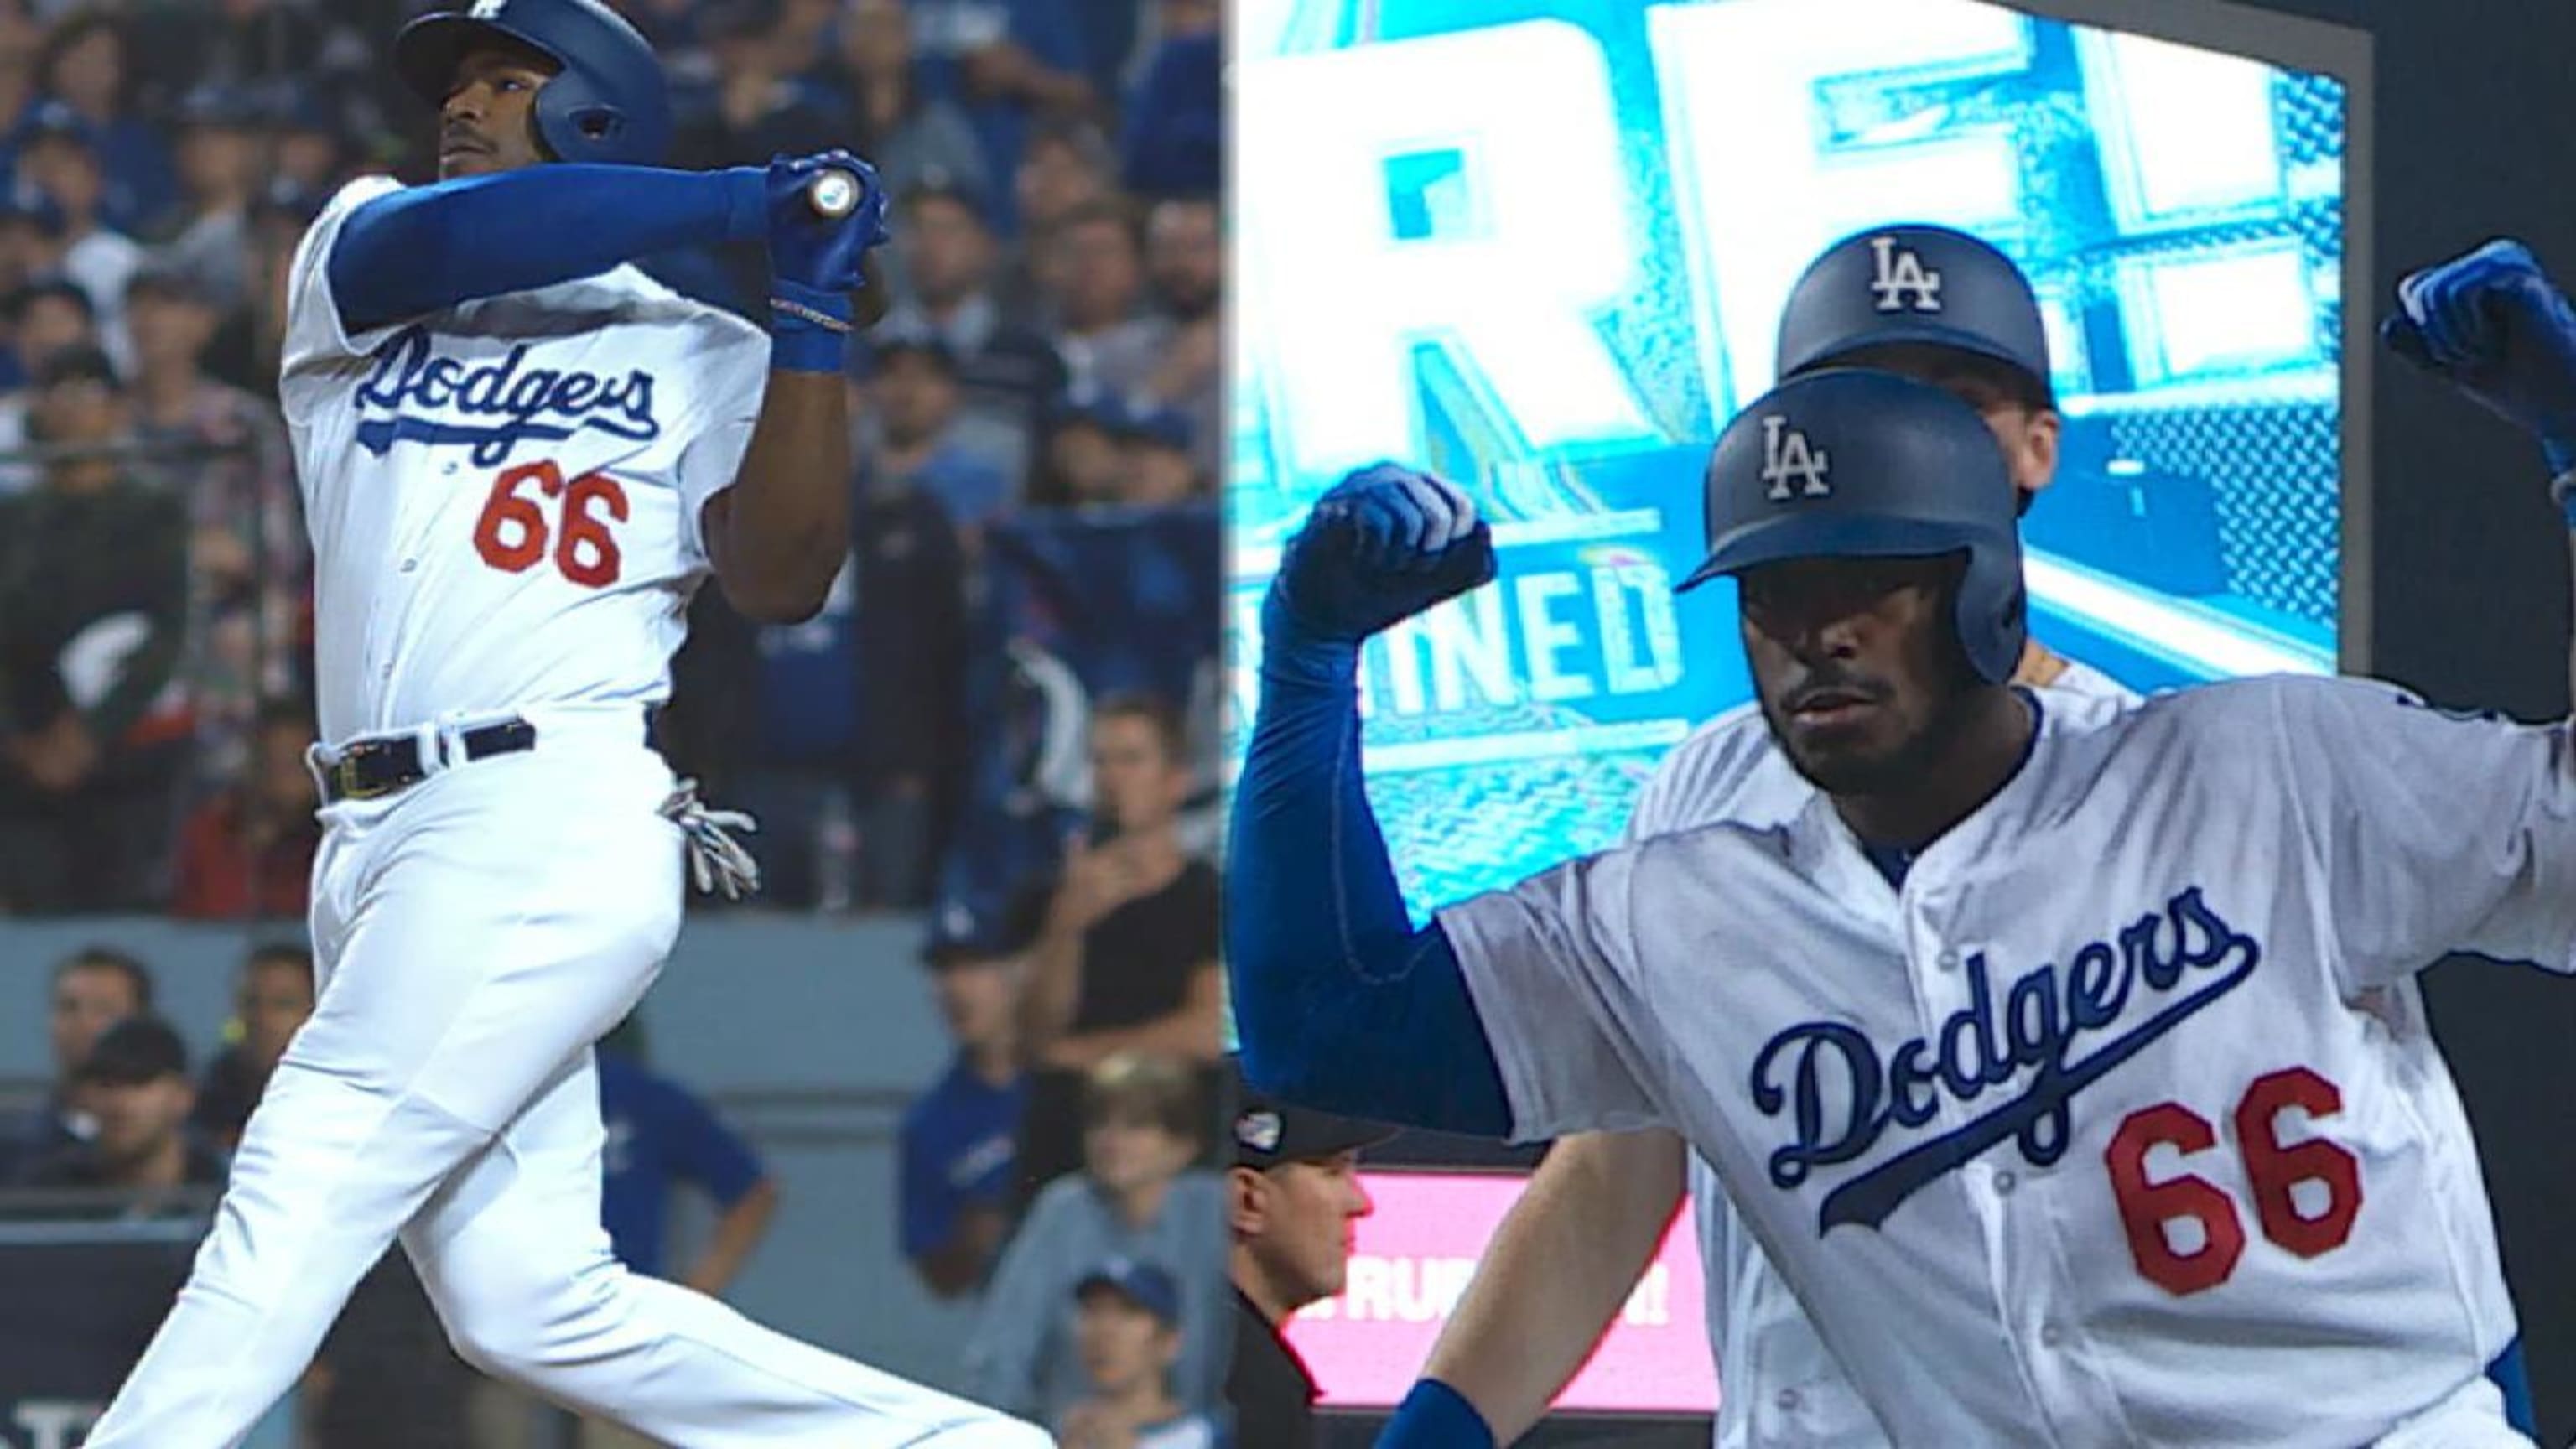 Yasiel Puig: Why did the Reds keep him in game through trade talks?